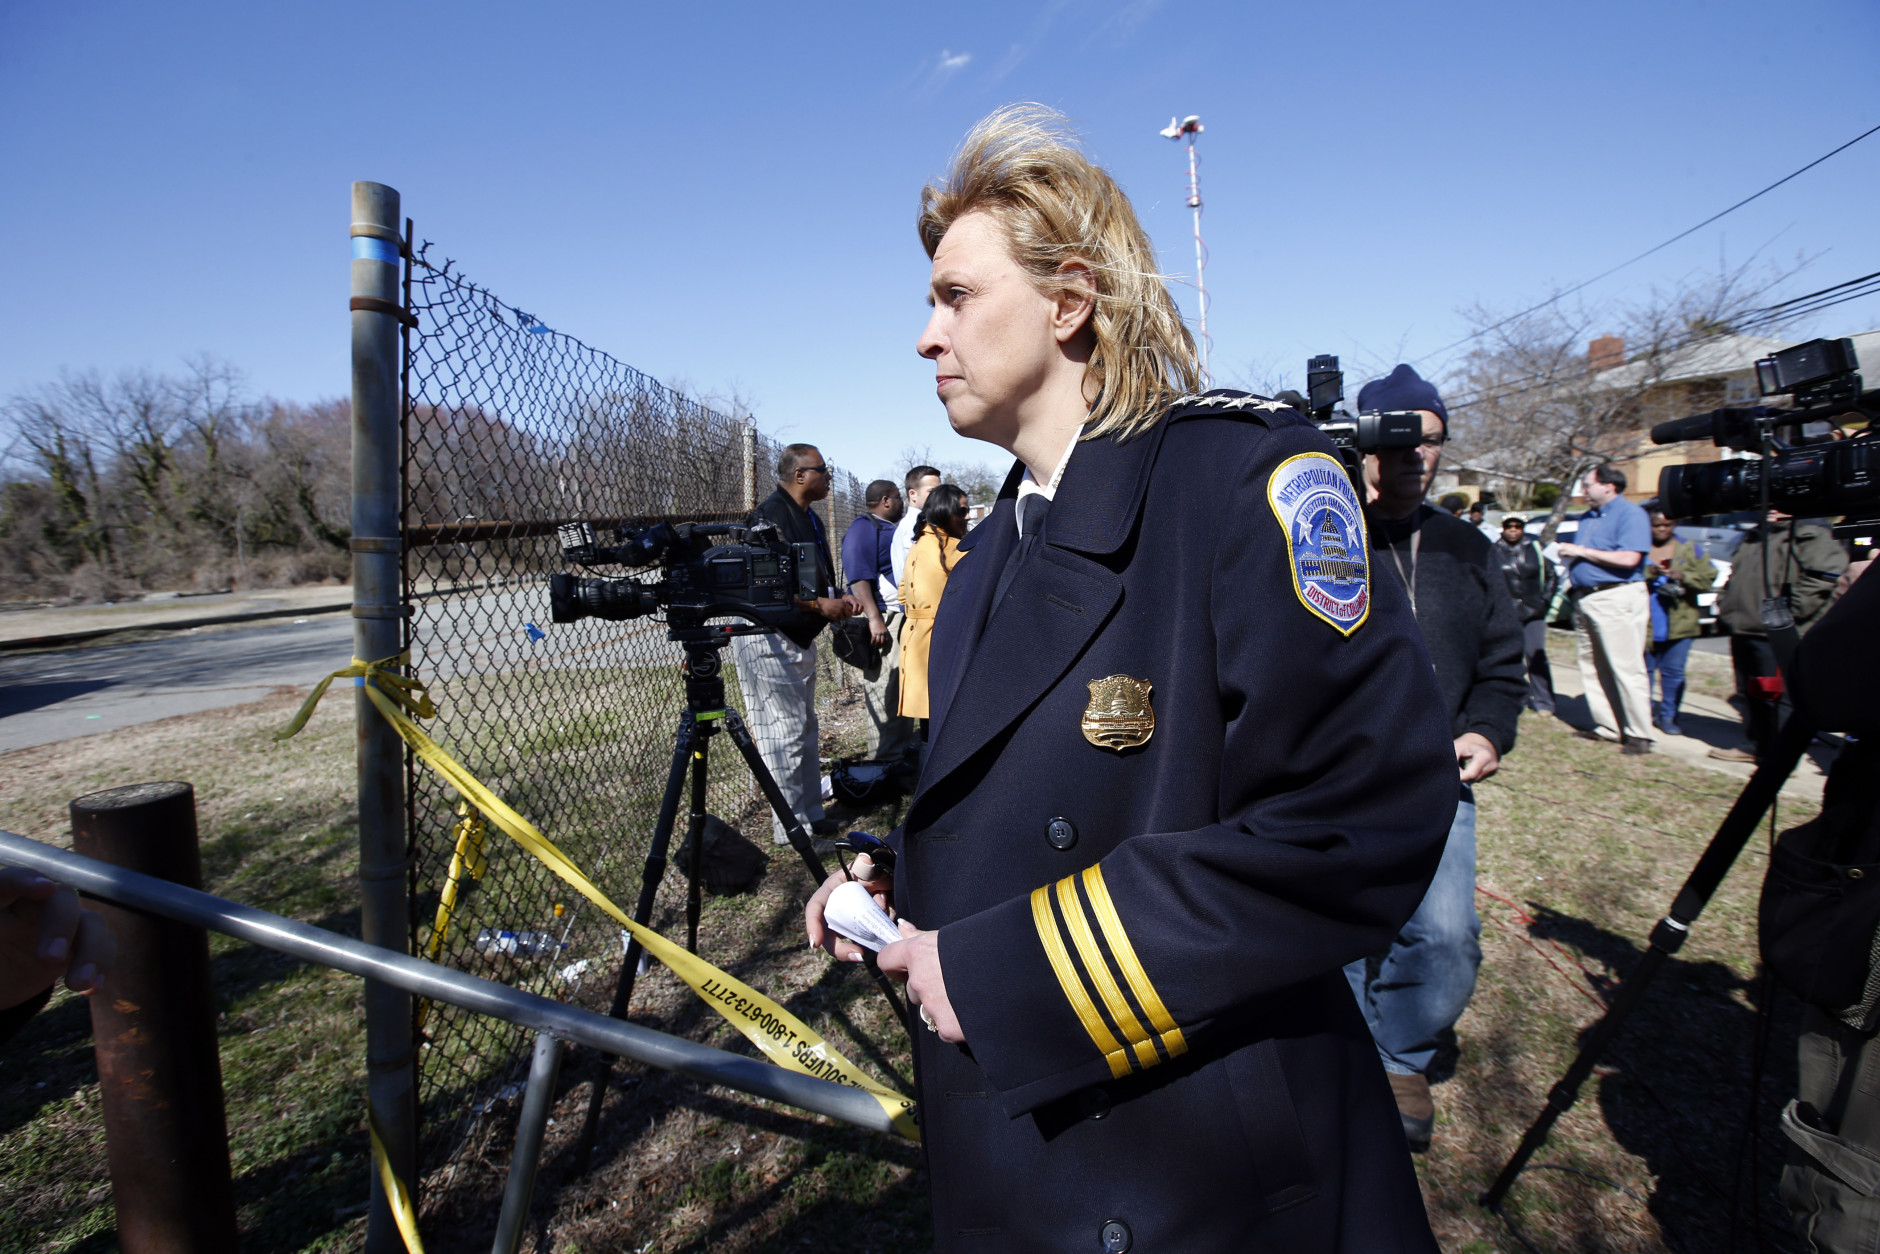 Washington Police Chief Cathy Lanier leaves after speaking during a media availability about a body found in Kenilworth Park, Monday, March 31, 2014, in Washington. Police have been searching the park in northeast Washington since last week for clues in the case of eight-year-old Relisha Rudd, last seen in the company of Kahlil Tatum, a janitor at the homeless shelter where she lived with her mother and brothers.(AP Photo/Alex Brandon)